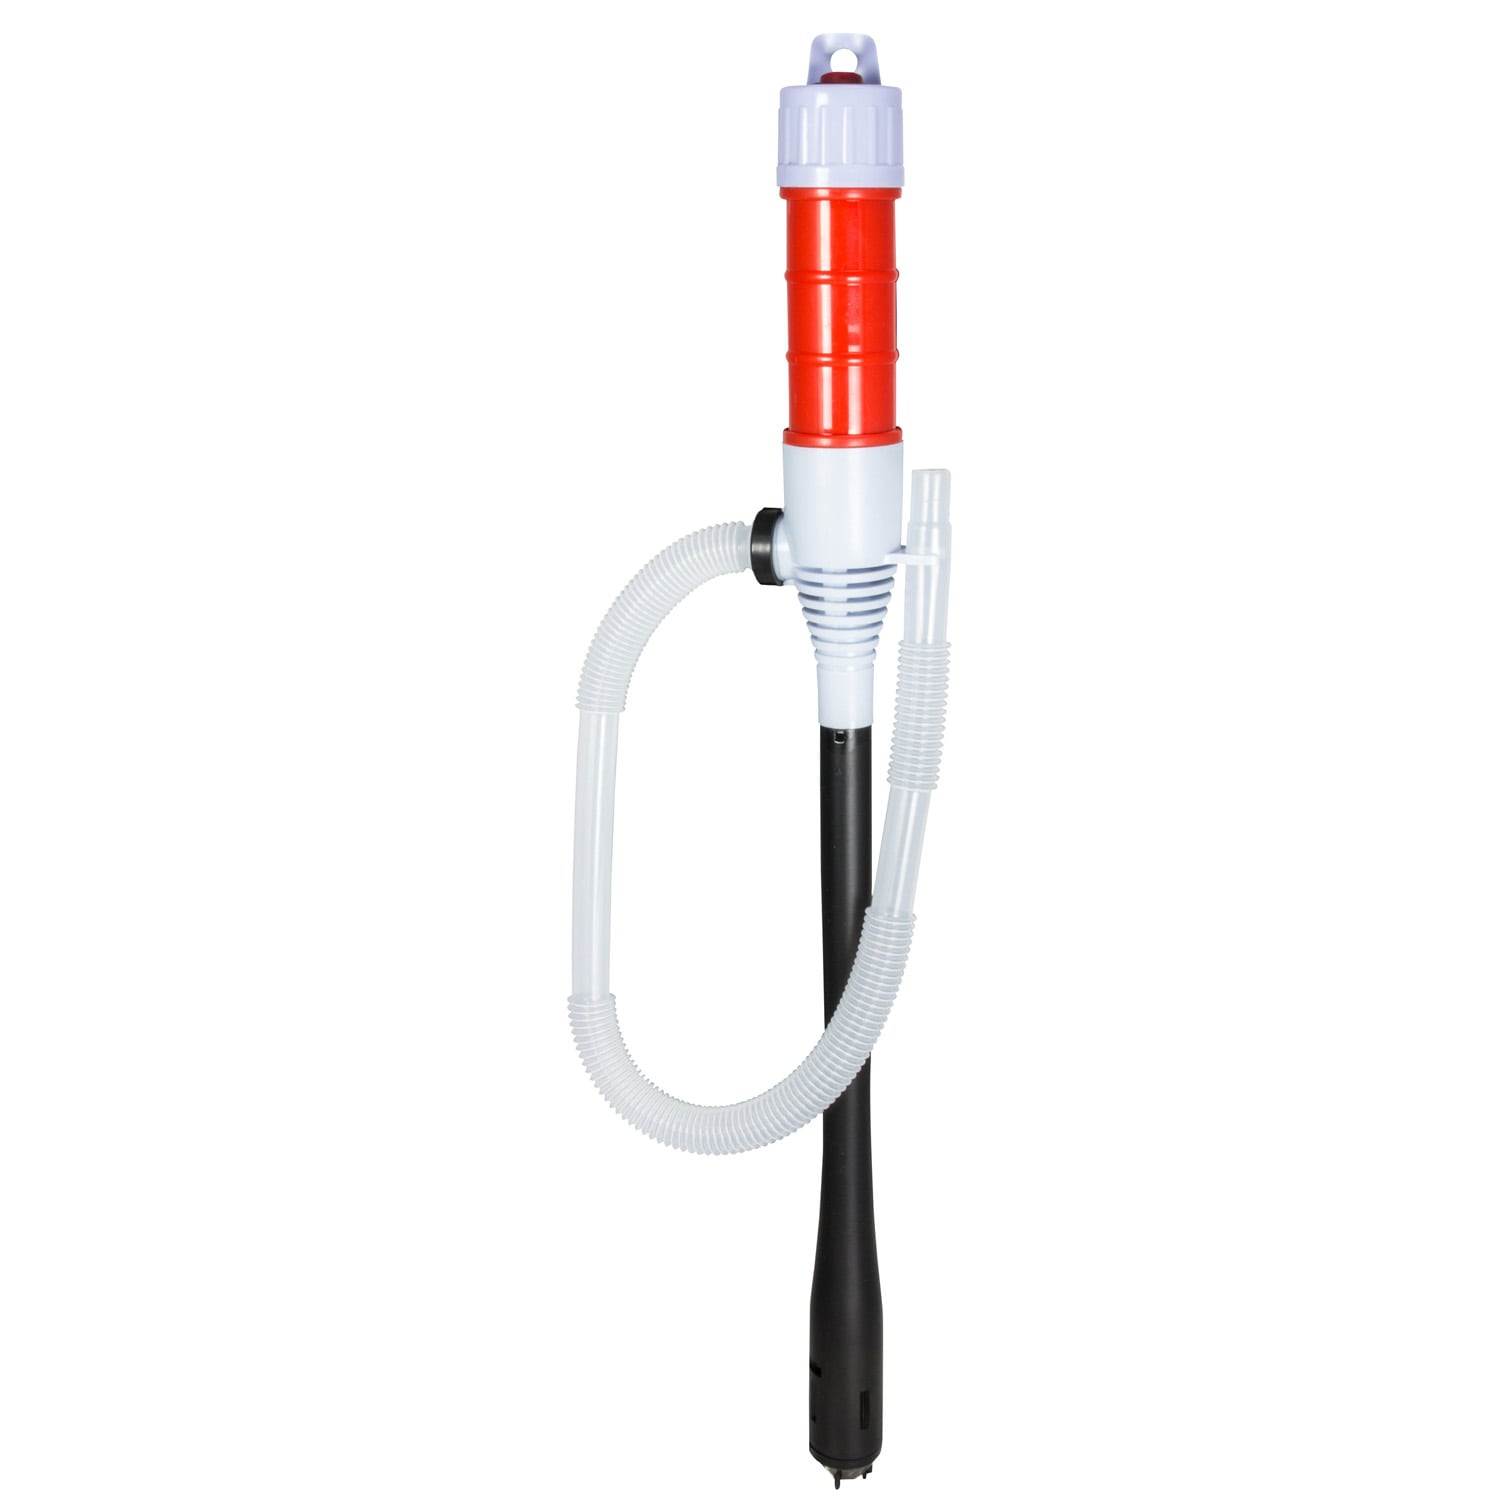 FloTool 10810 Battery Operated Siphon Pump